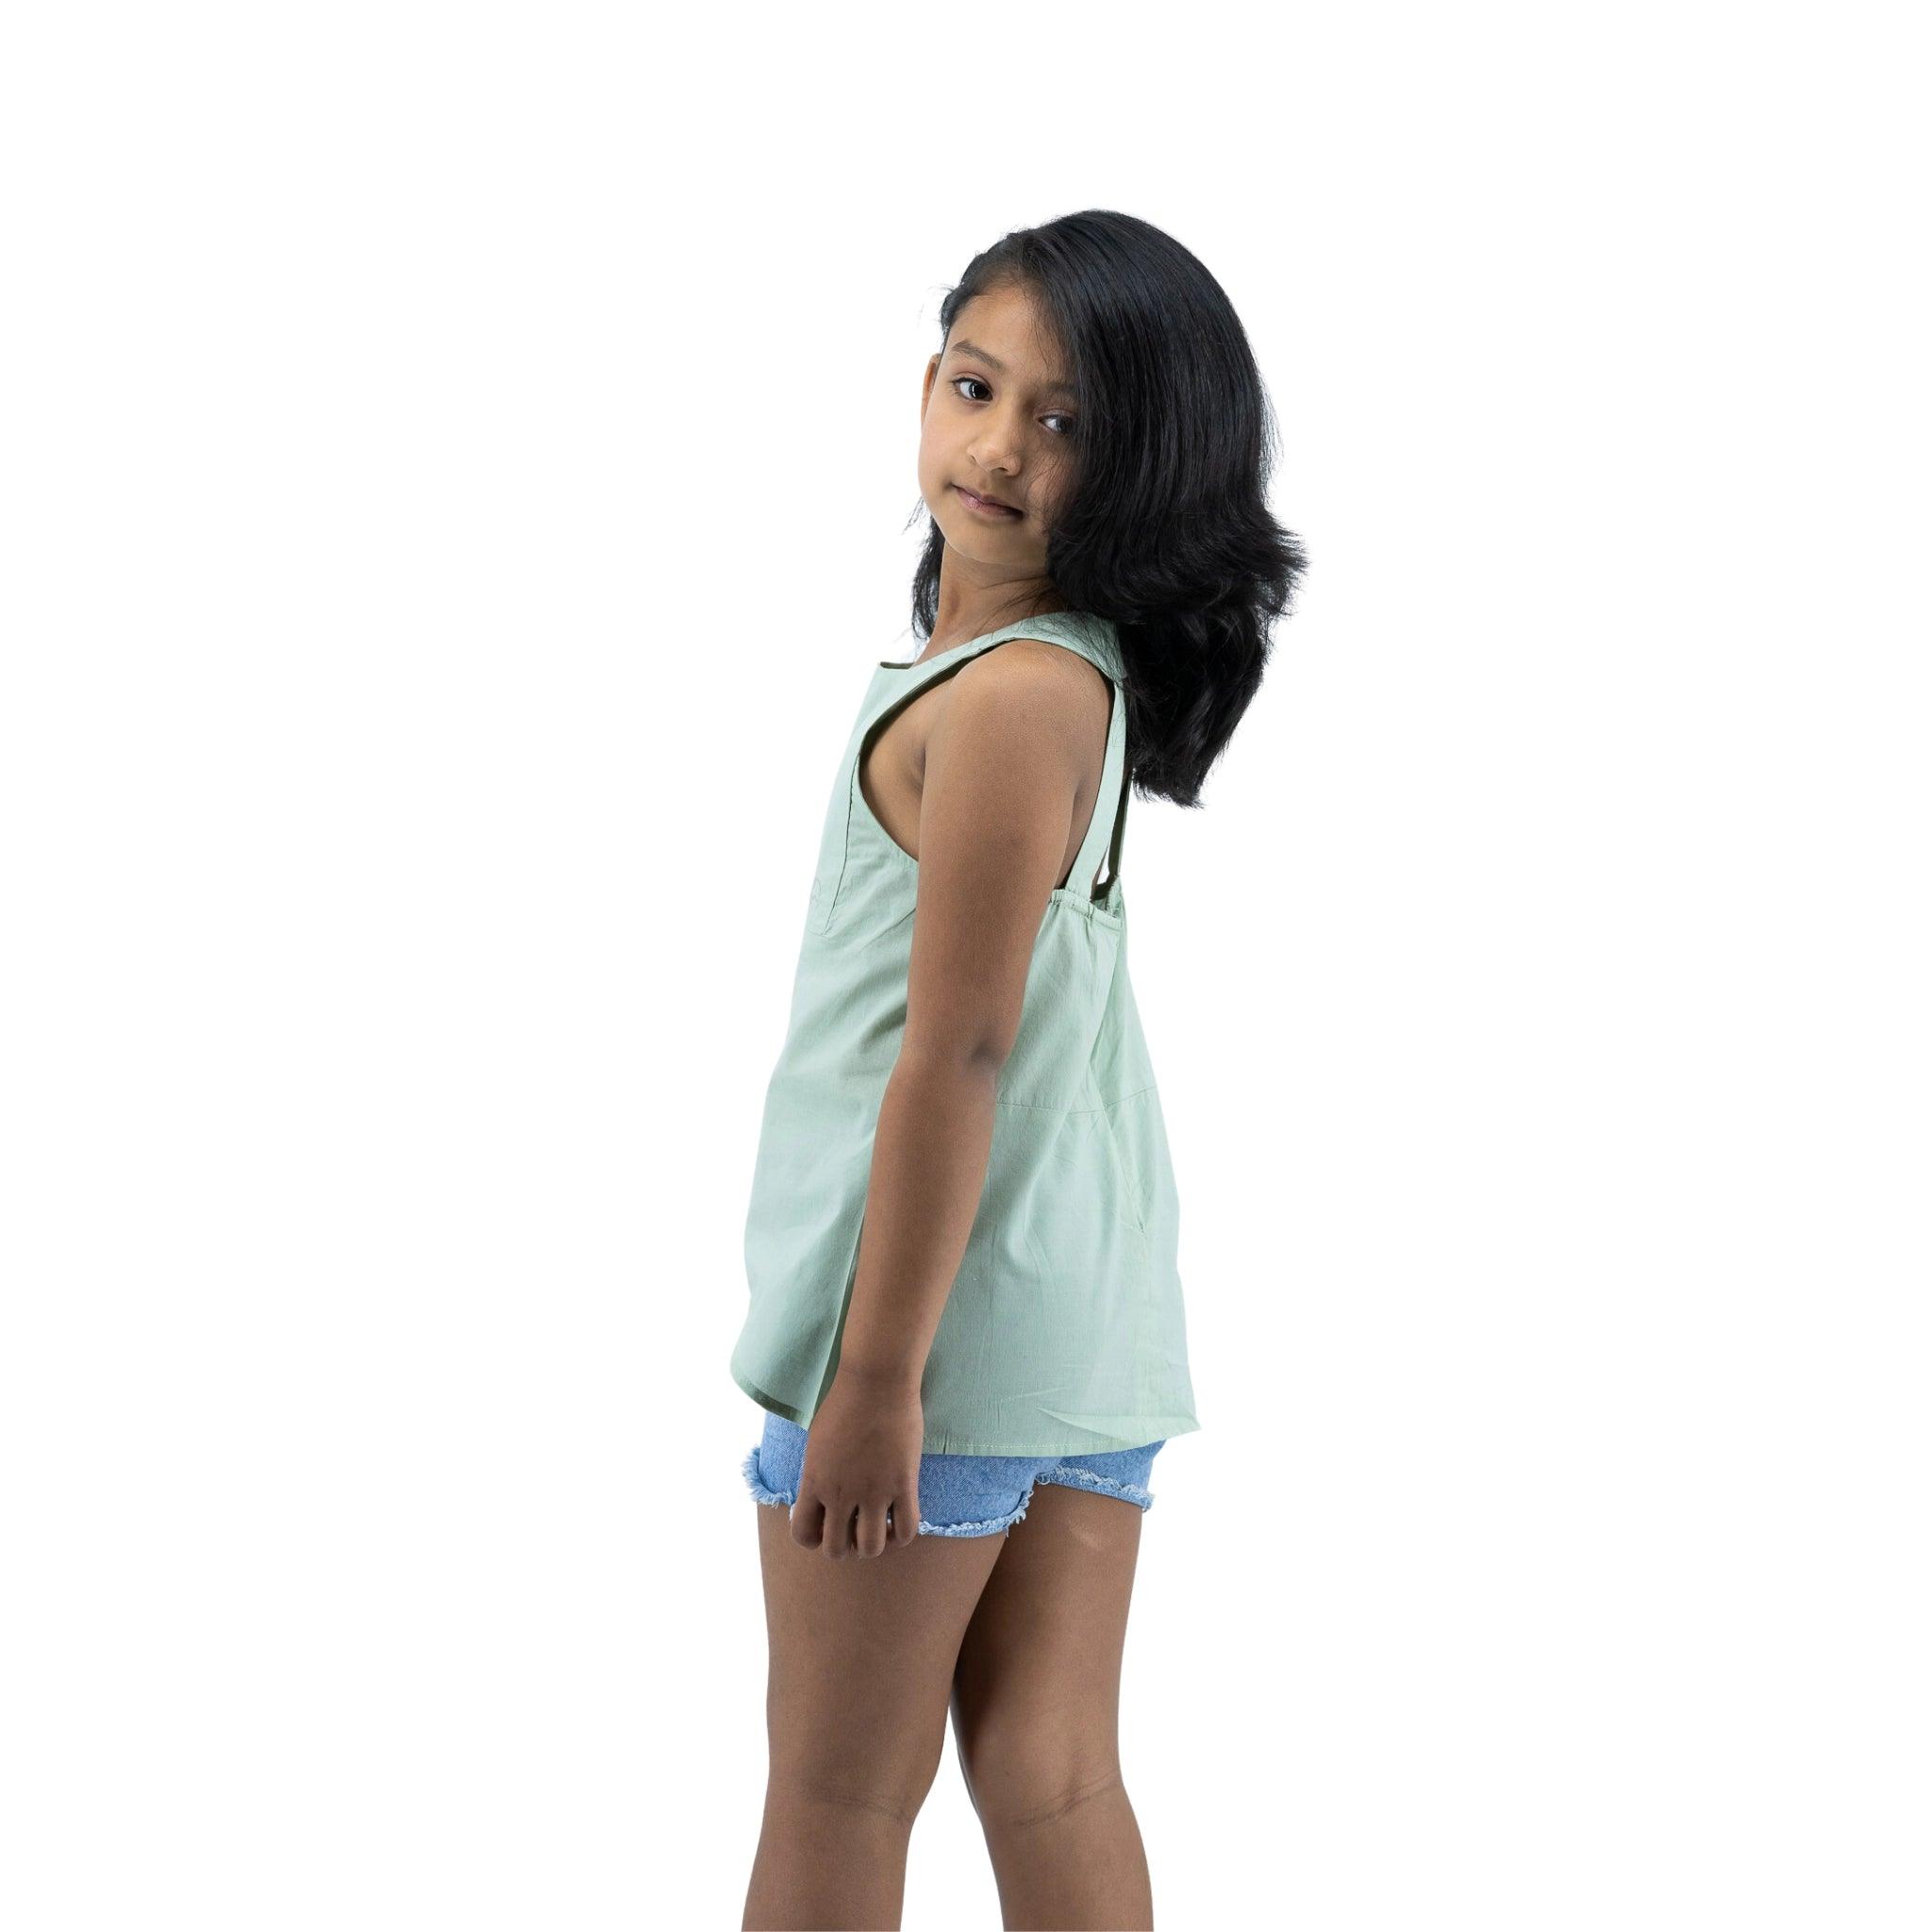 Young girl in a Karee Smoke Green Cotton Bib Neck Top for kids and denim shorts standing sideways, looking over her shoulder, against a white background.